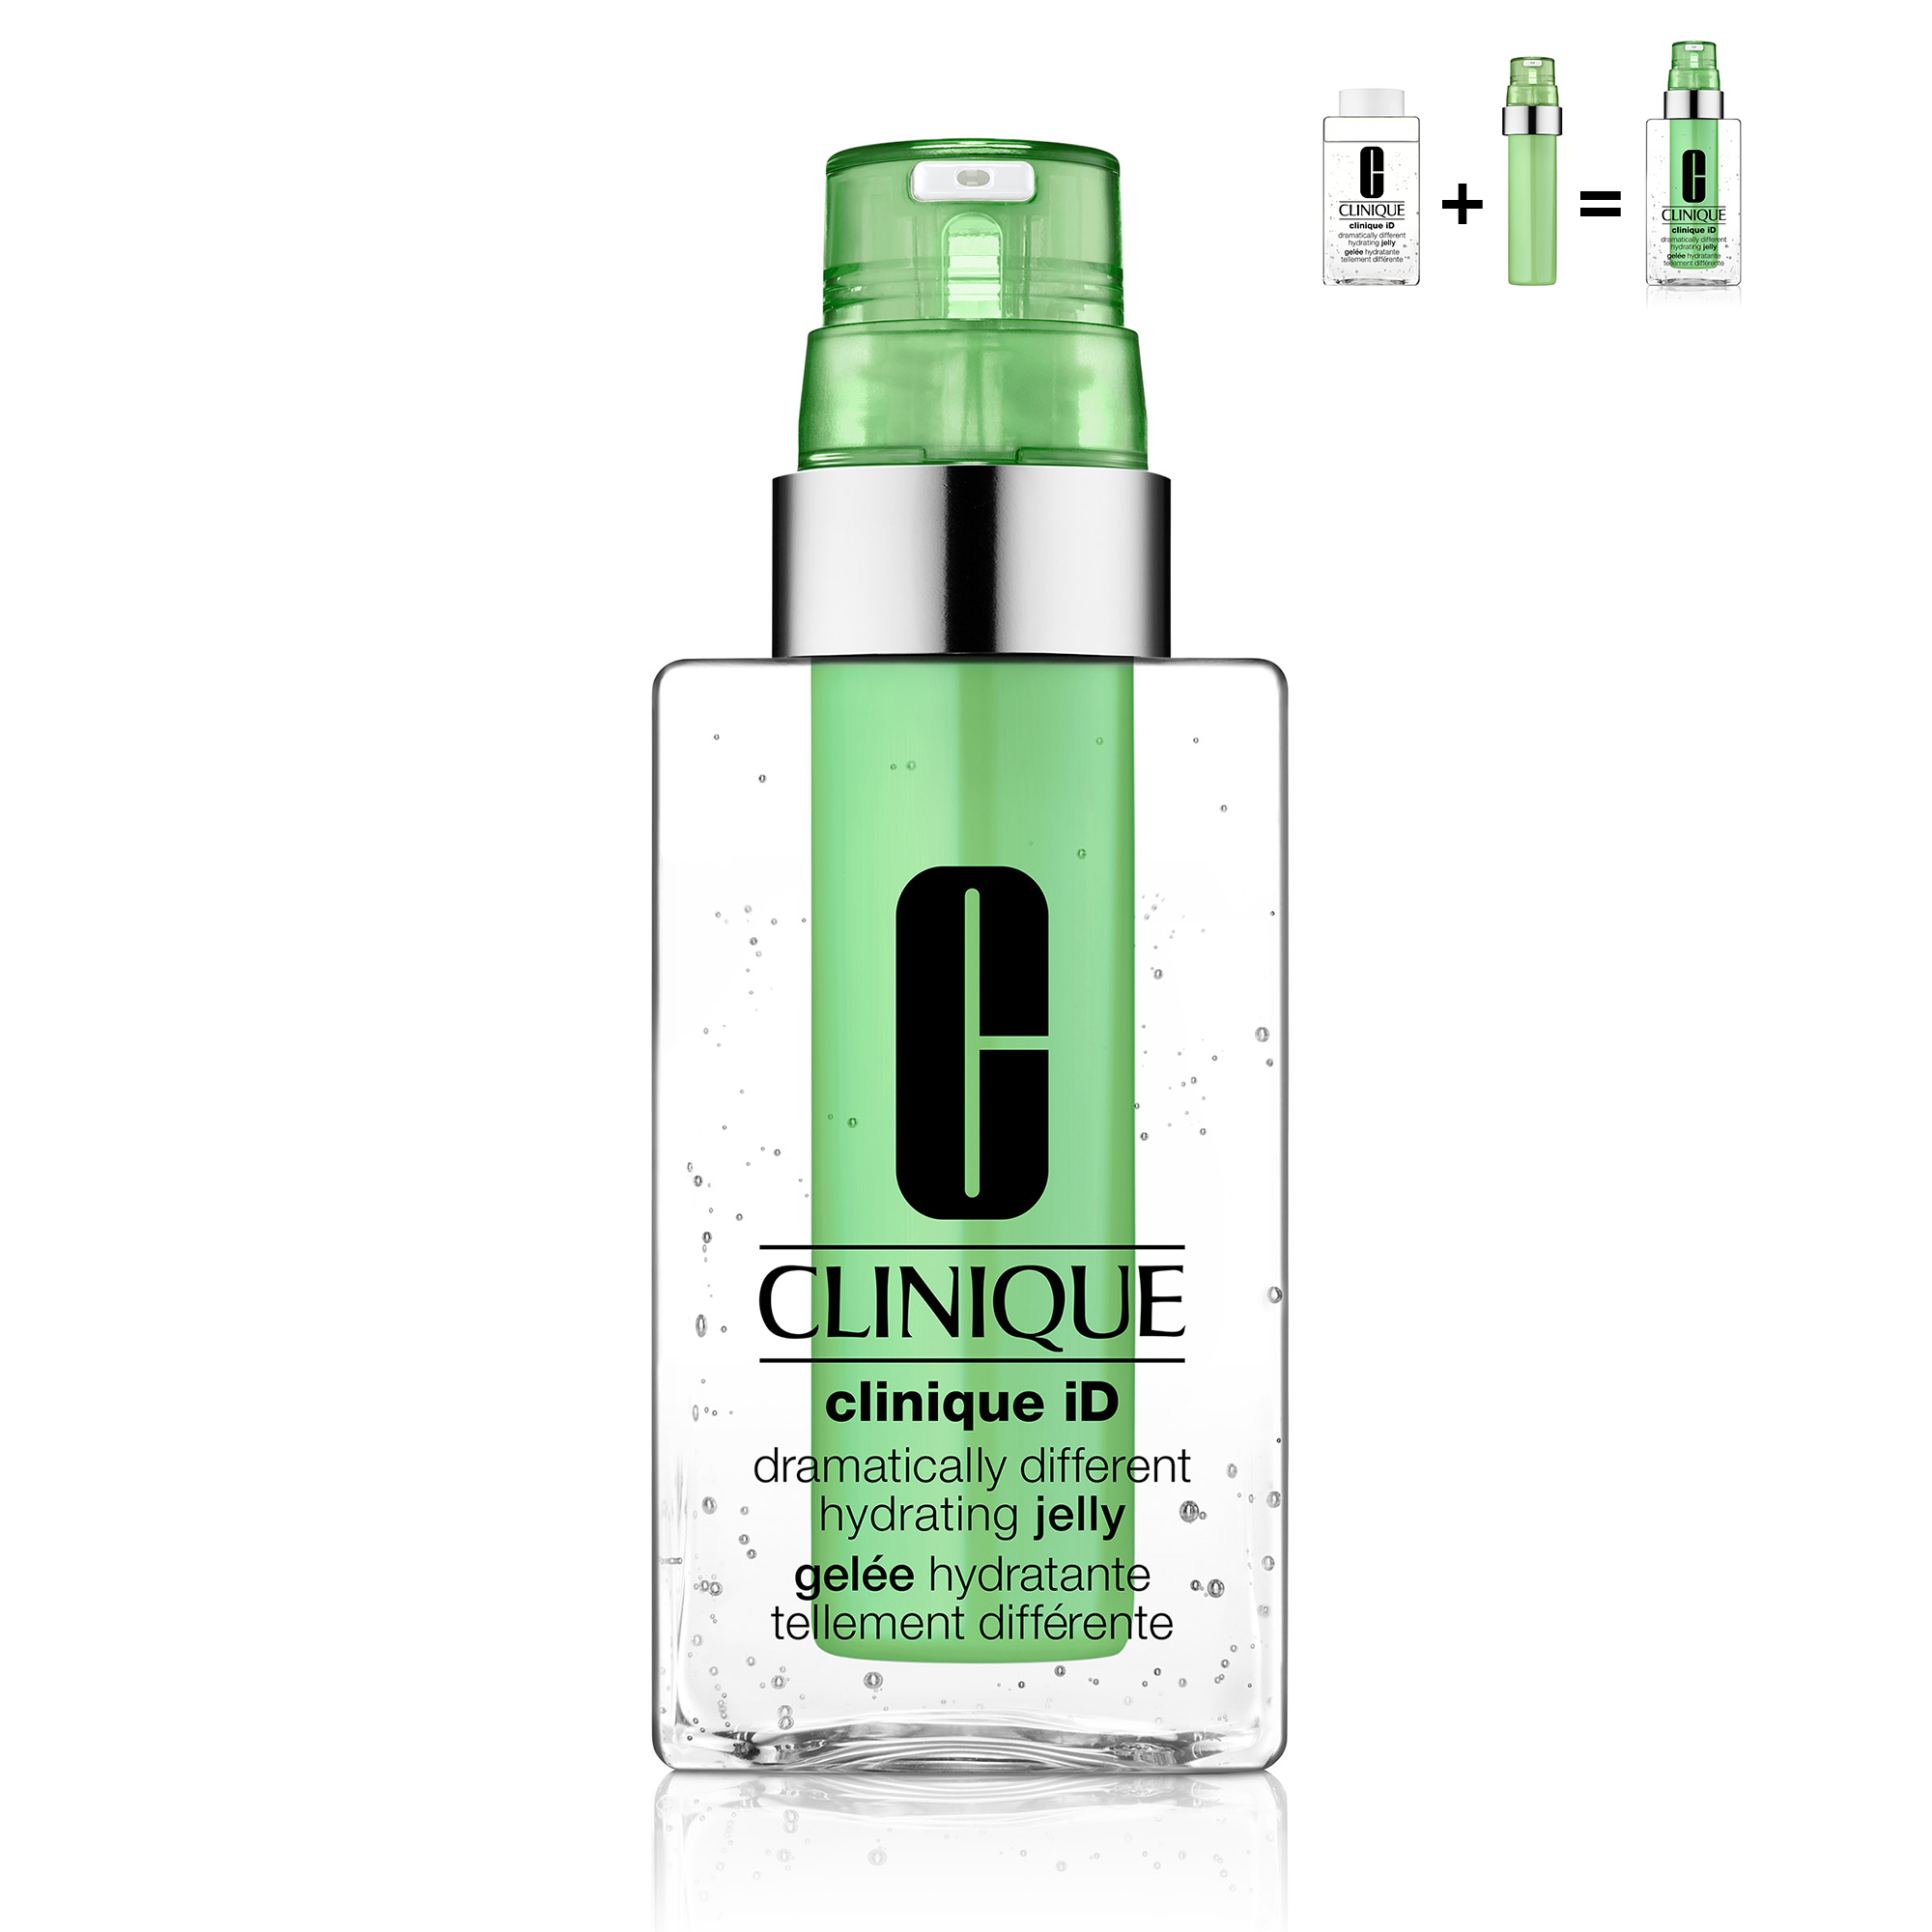 Clinique Id Active Cartridge Concentrate Irritation + Base Dramatically Differen